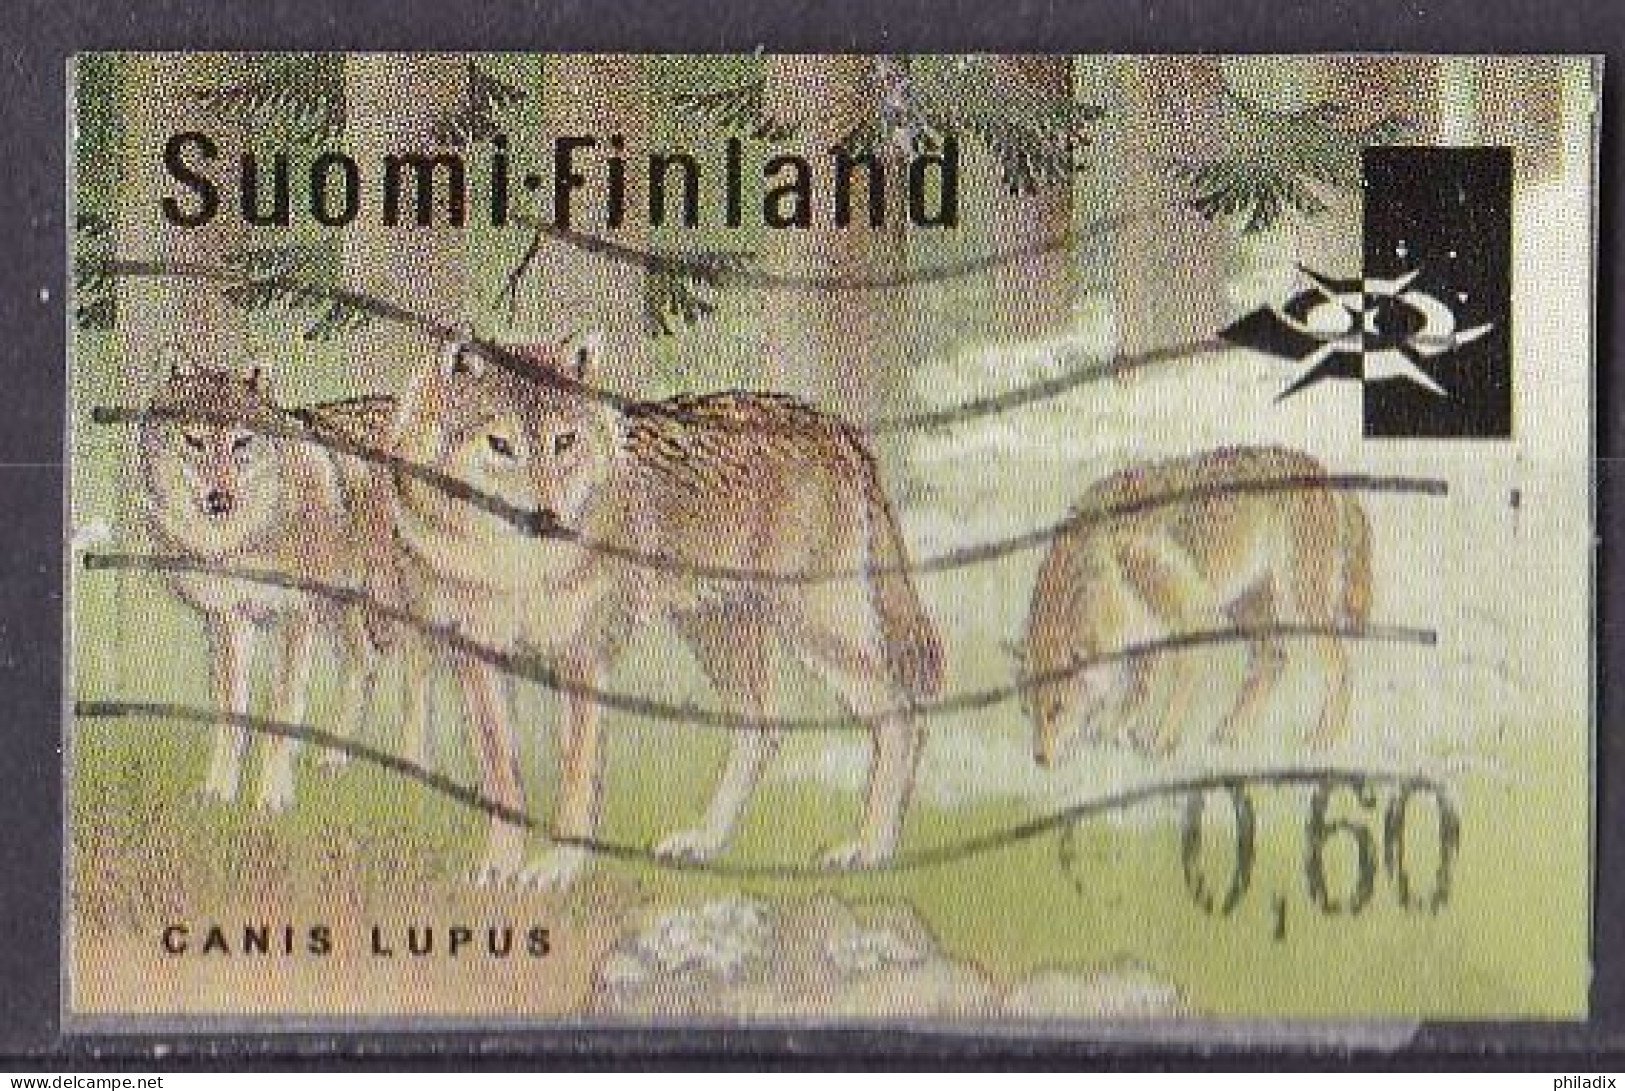 Finnland Marke Von 2002 O/used (A4-9) - Used Stamps